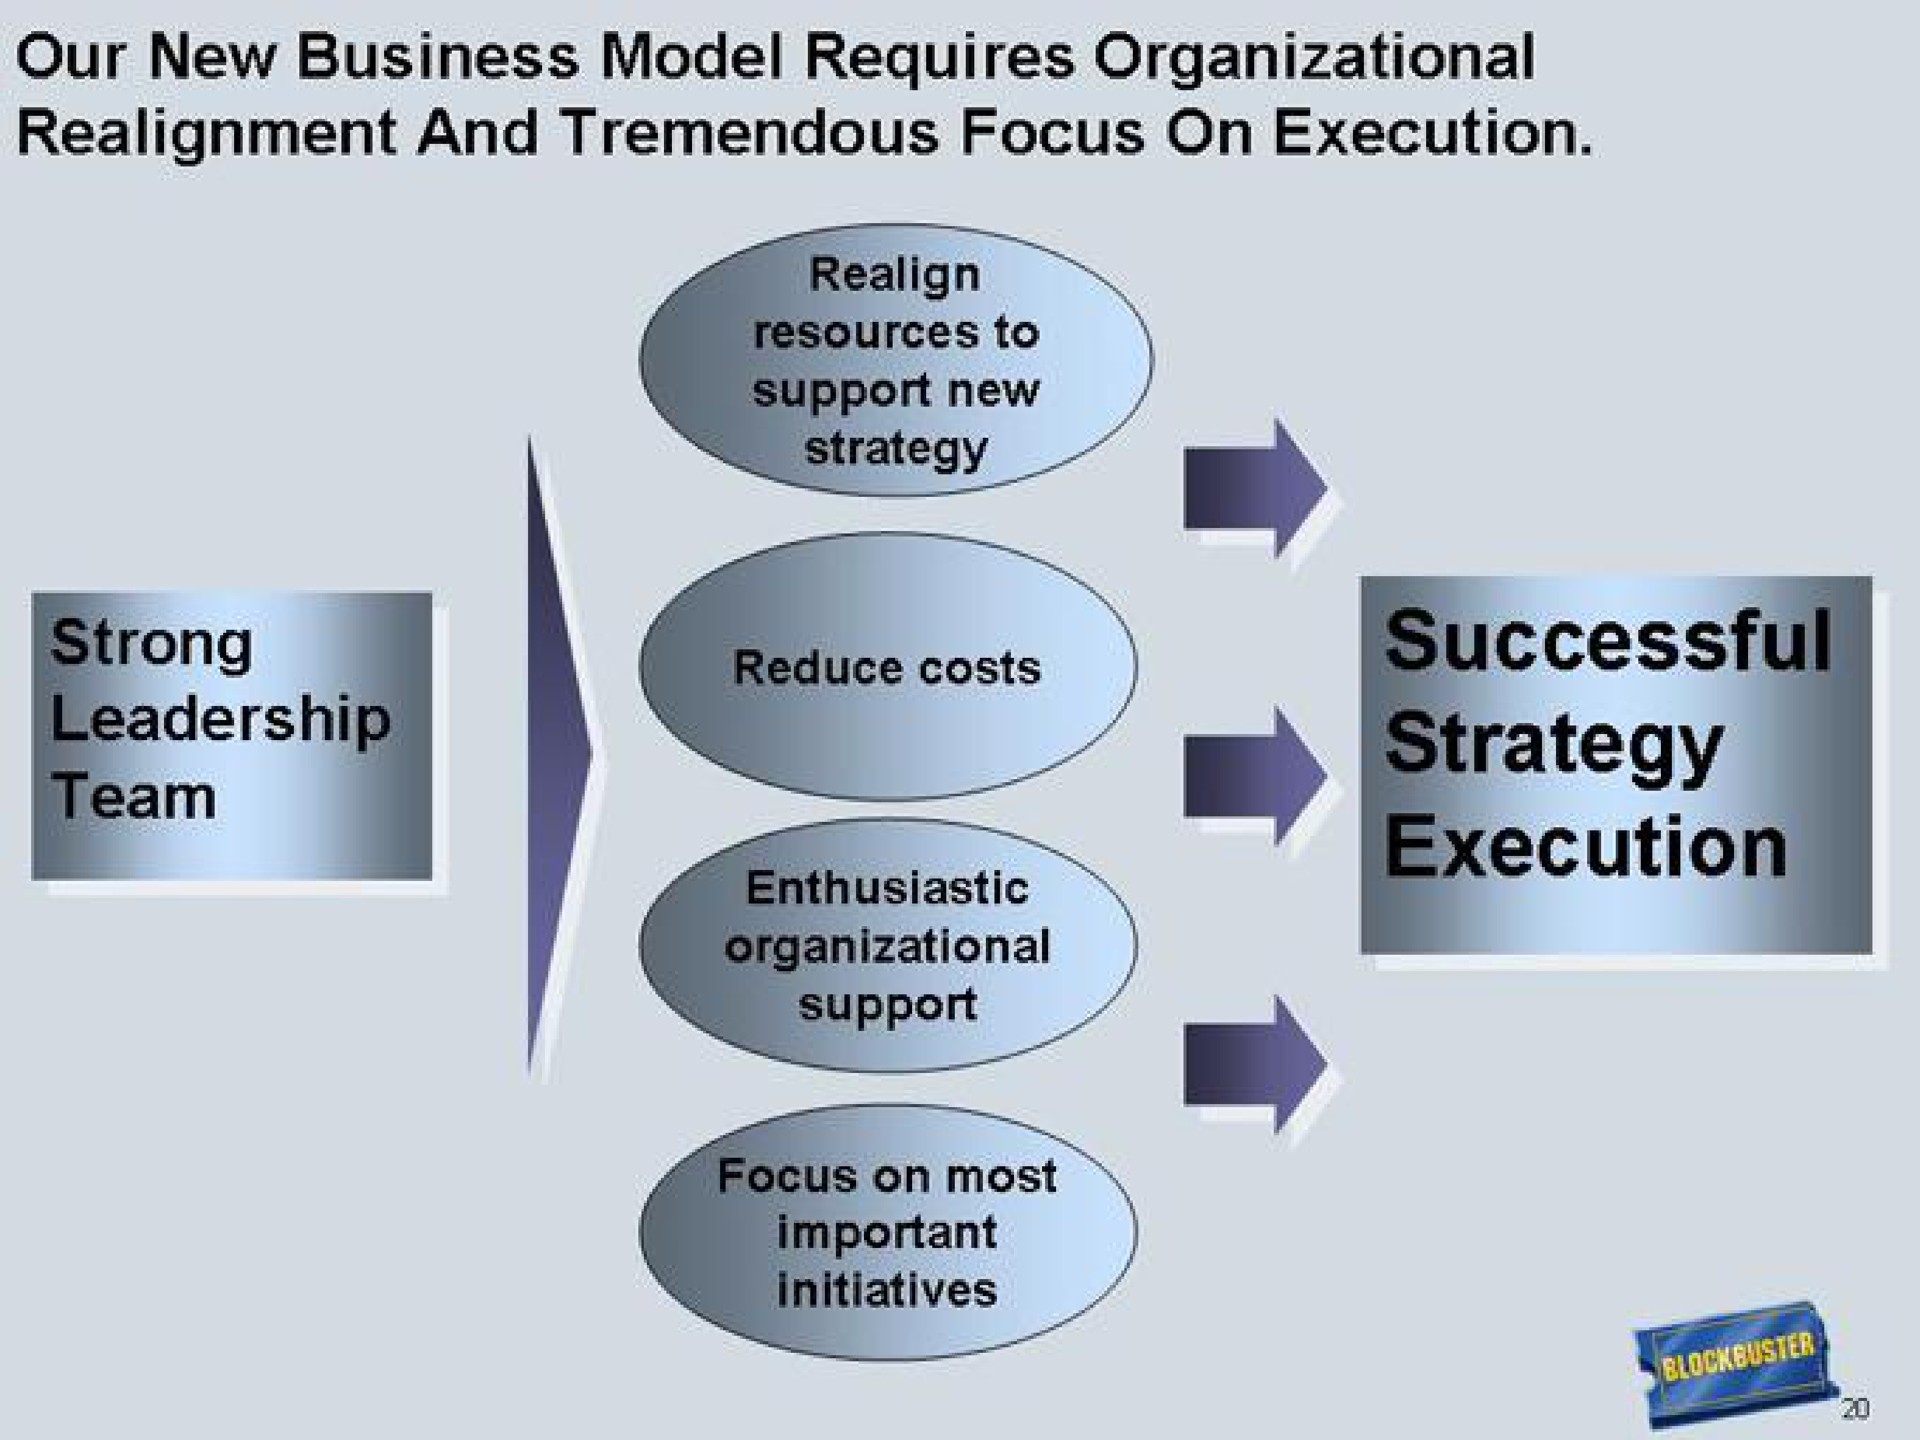 our new business model requires organizational realignment and tremendous focus on execution | Blockbuster Video